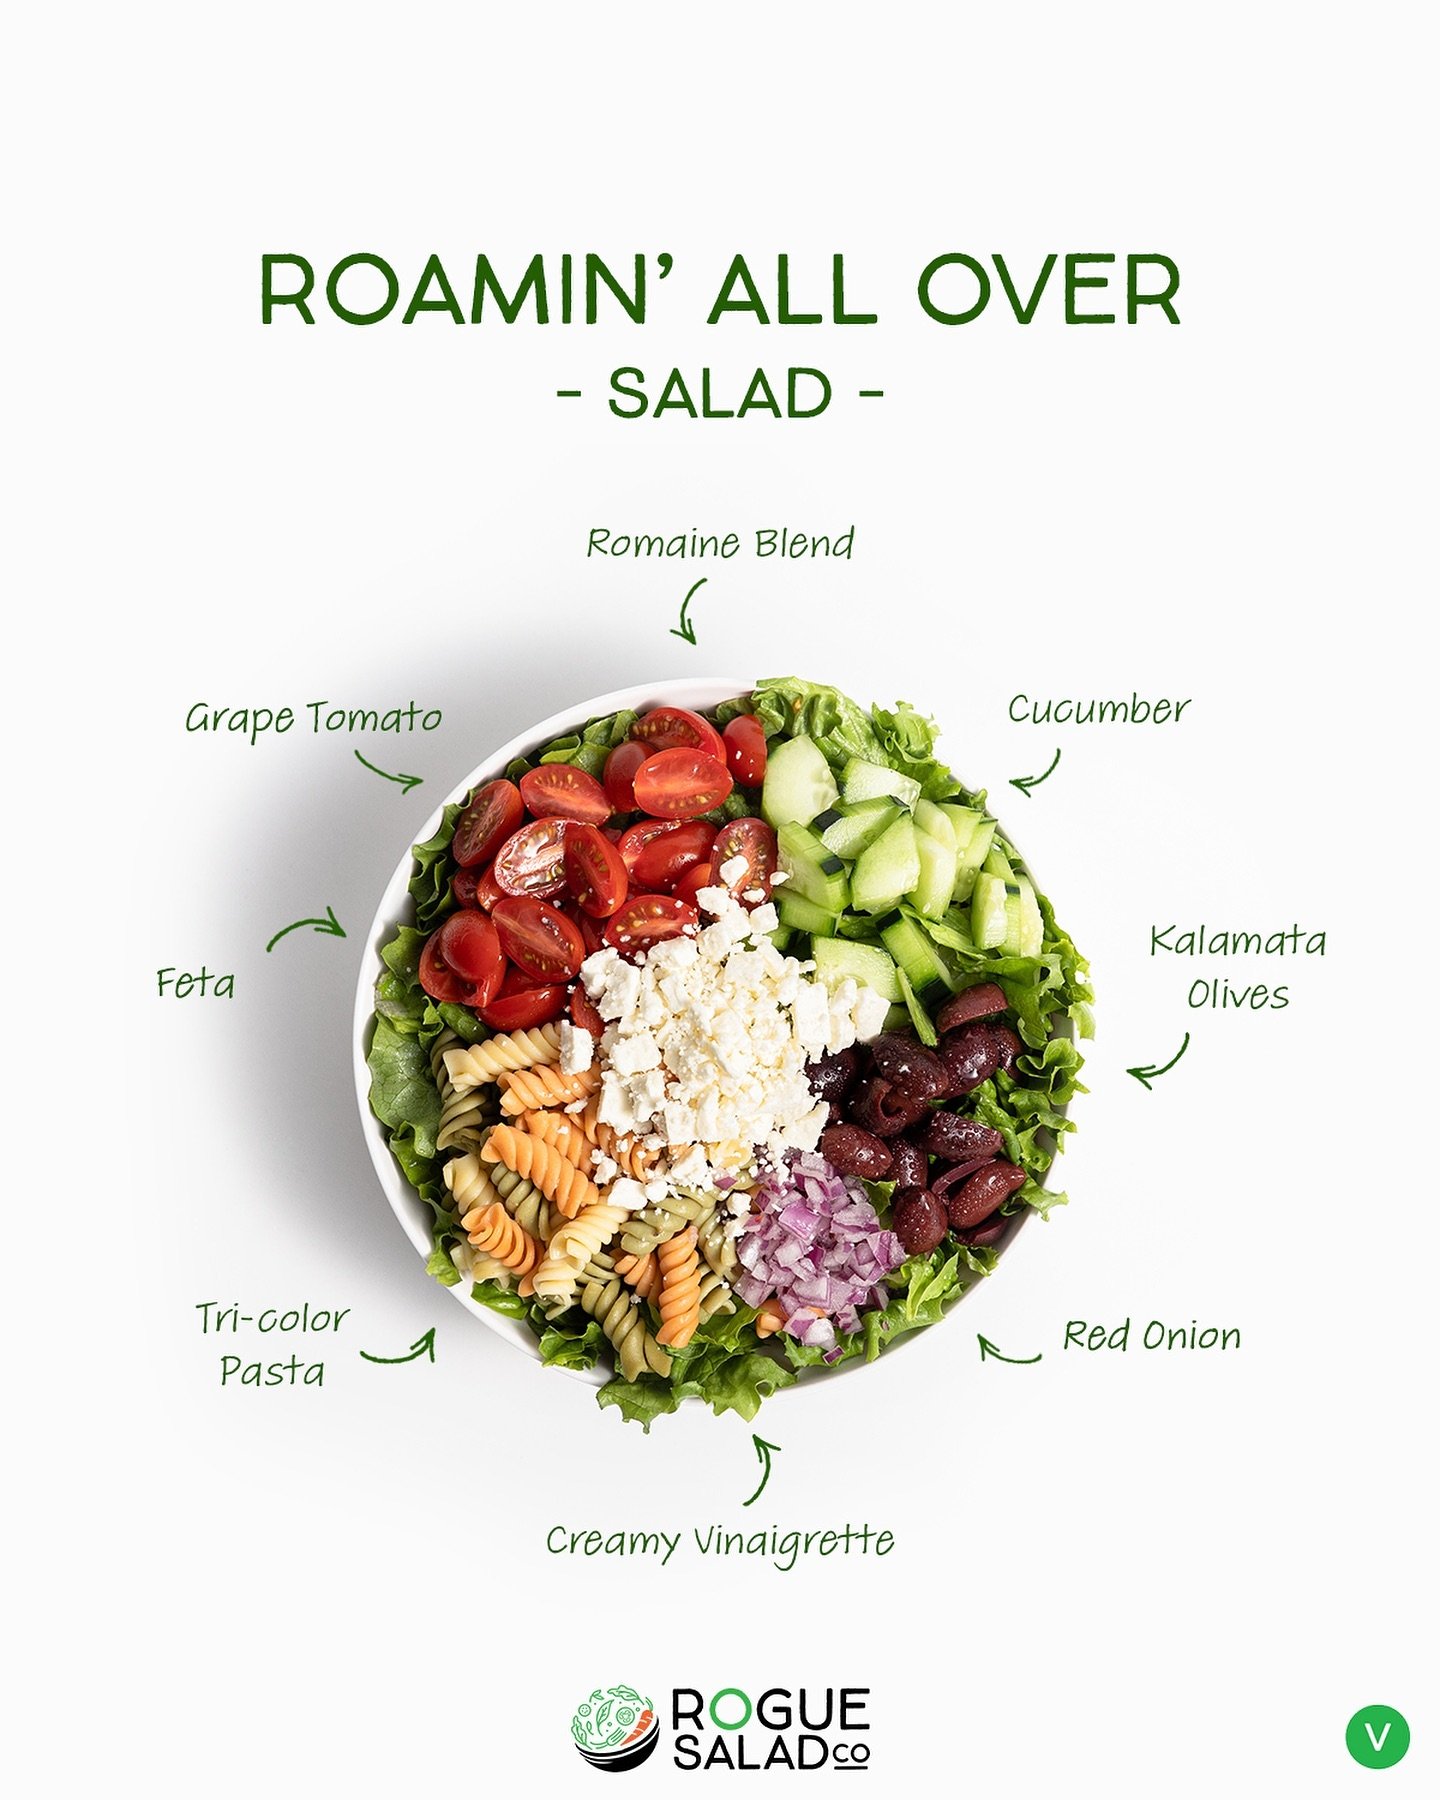 What&rsquo;s in our Roamin&rsquo; All Over Salad?

🥬 Romaine Blend
🧀 Feta
🫒 Kalamata Olives
🍝 Tri-color Pasta
🧅 Red Onion
🥒 Cucumber
🍅 Grape Tomato
🍶 Creamy Vinaigrette 

#RogueSalad #SaladSquad #SouthernOregon #RogueValley #GoRogue